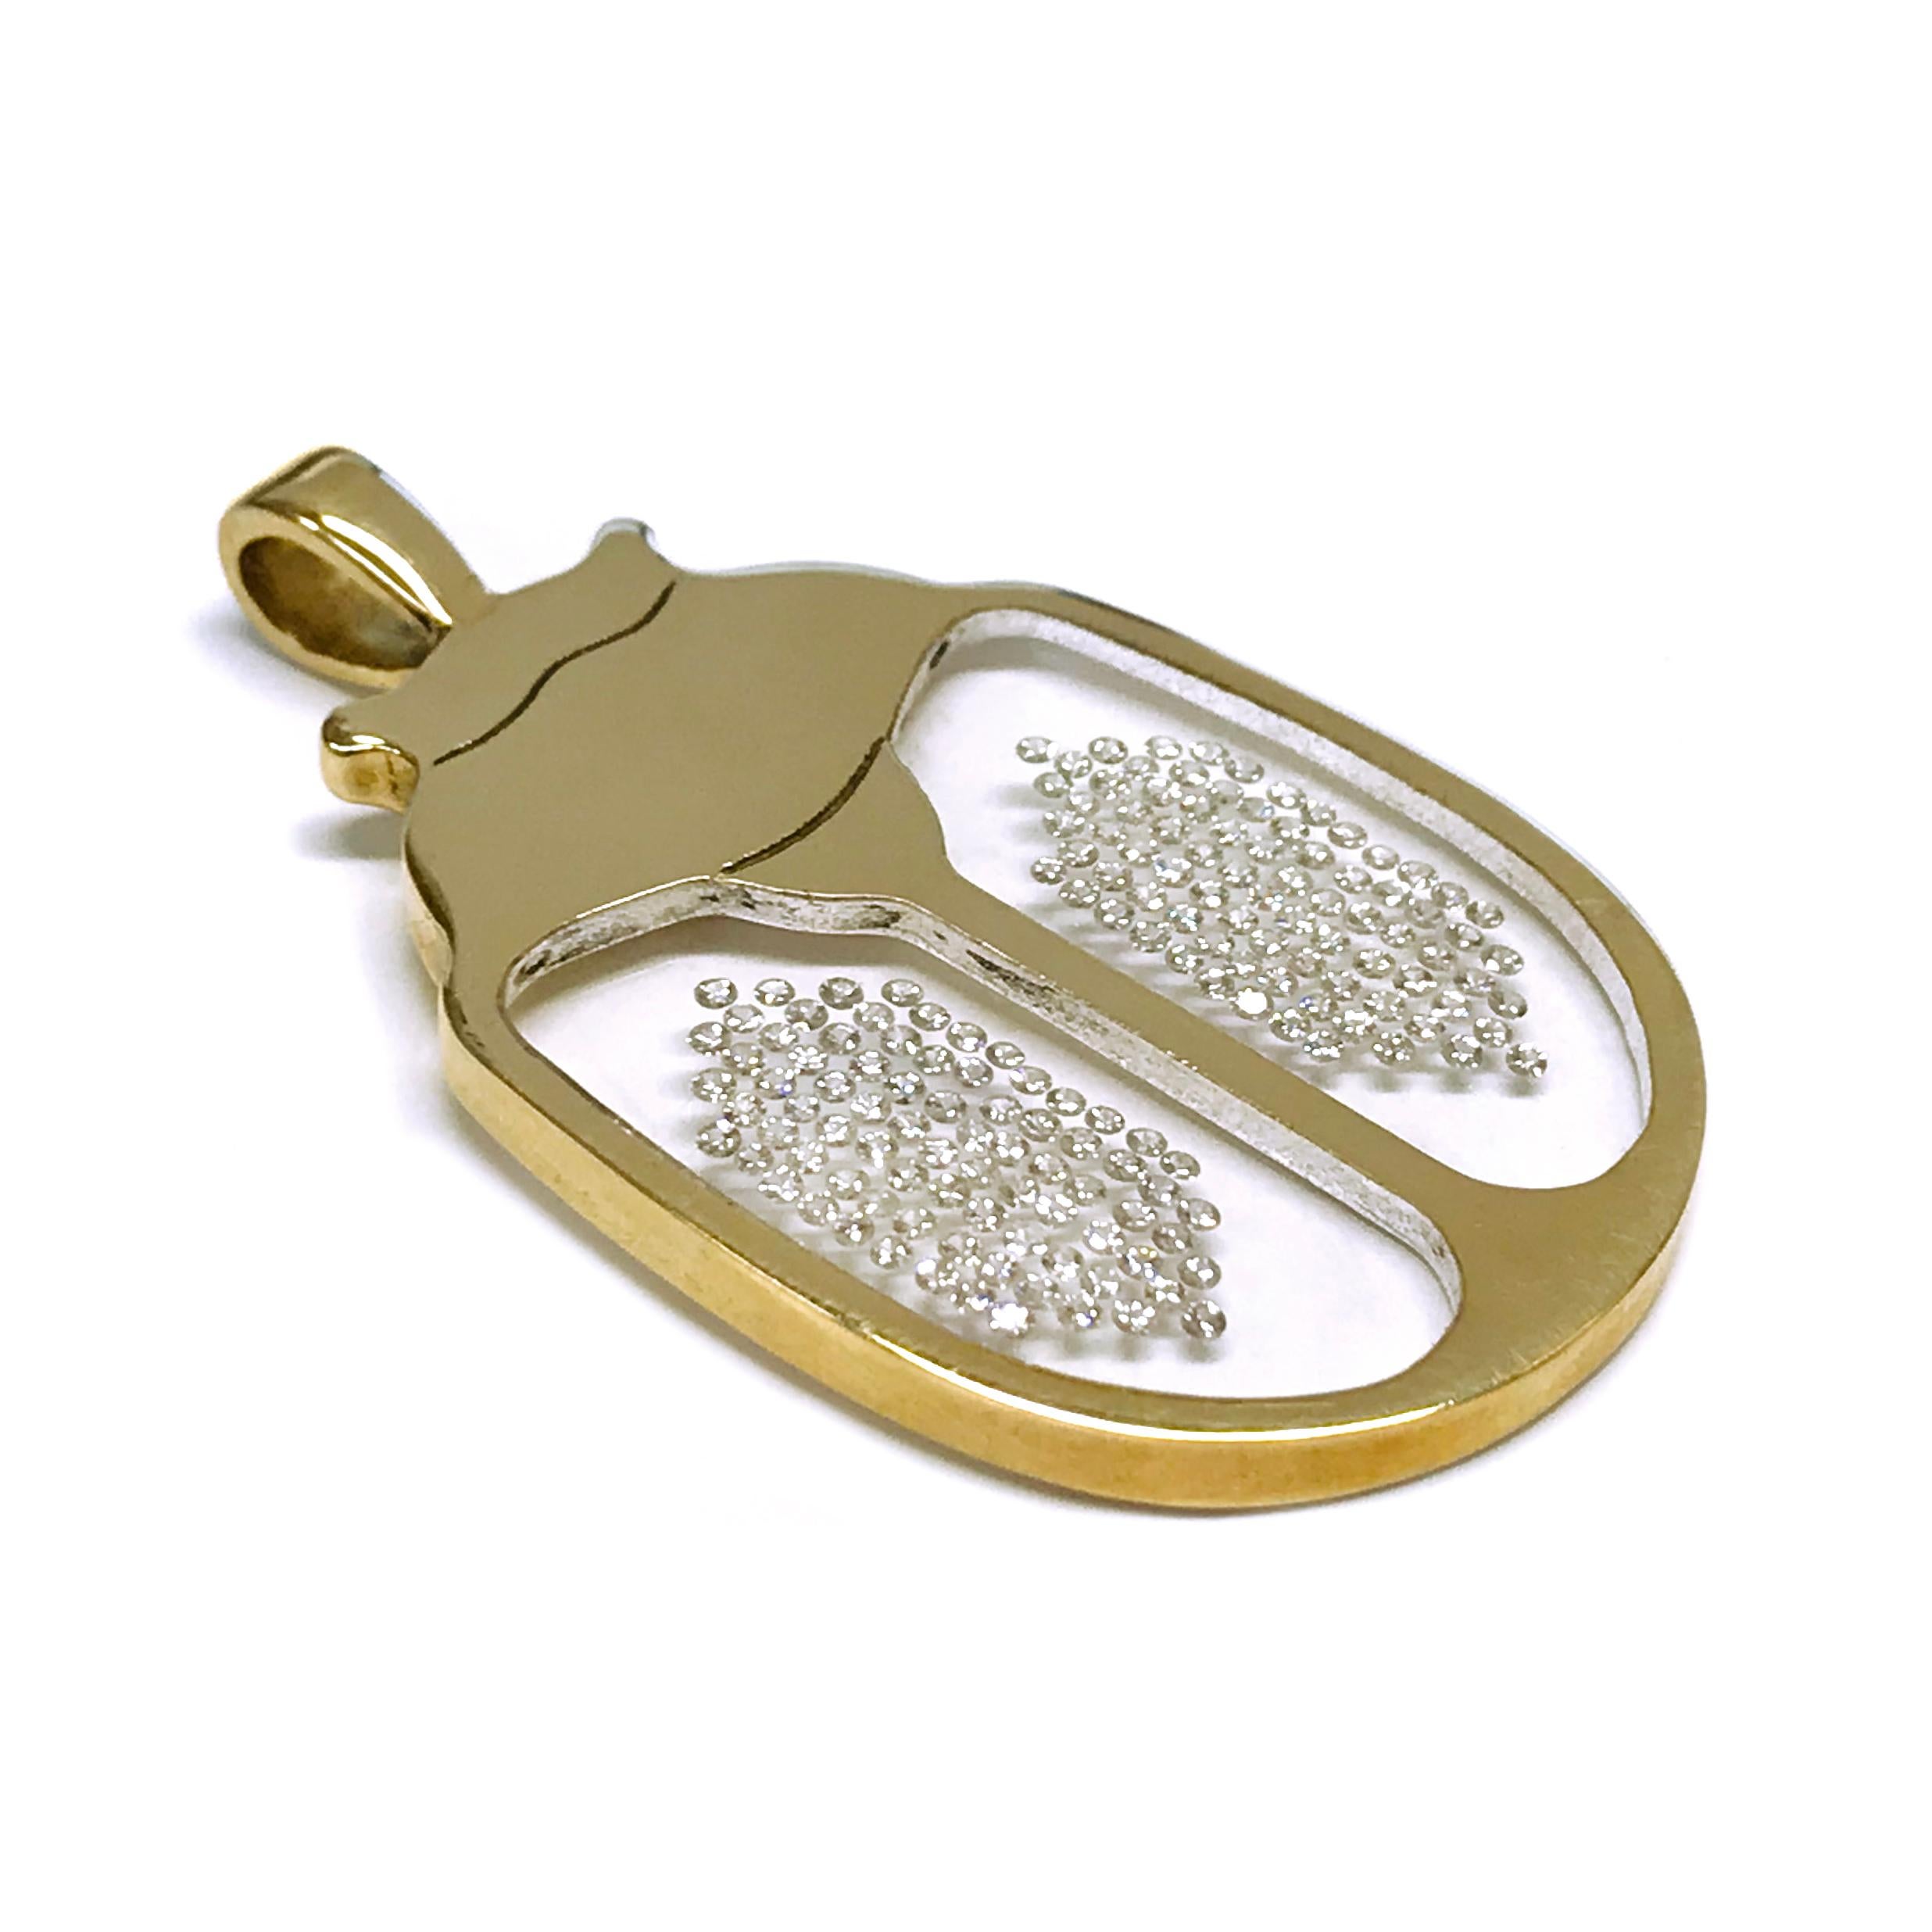 Incogem Floating Diamond Scarab/Lovebug/Ladybug Pendant: 14k Yellow Gold. The pendant is handcrafted of recycled 14k yellow gold. The diamonds are brilliant-cut, VS1 in clarity (G.I.A.), and H in color (G.I.A.). The 150 diamonds have a total carat